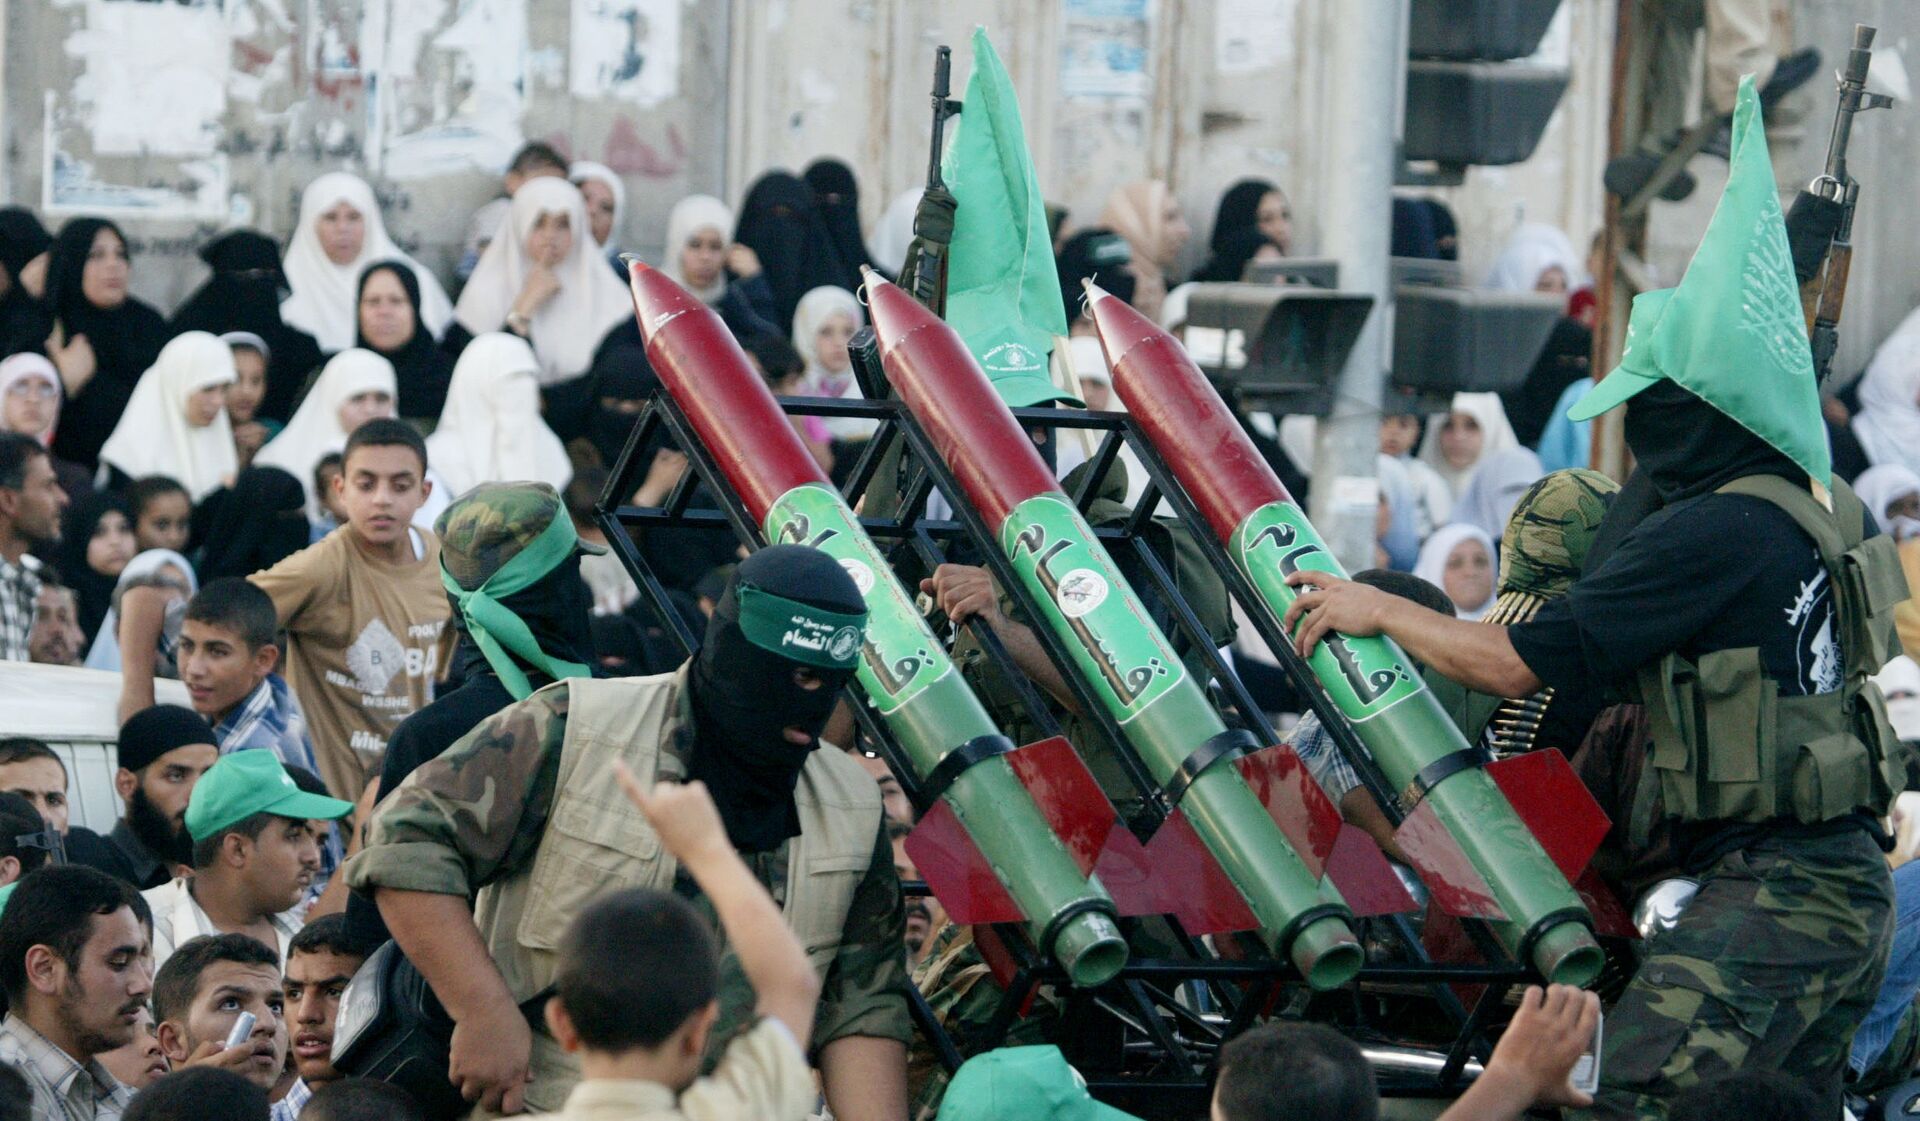 ‘Support Them If You Can’: Ex-Obama Aides Allegedly Promoted Hamas-Linked Charity Amid Gaza Flare-up - Sputnik International, 1920, 20.05.2021